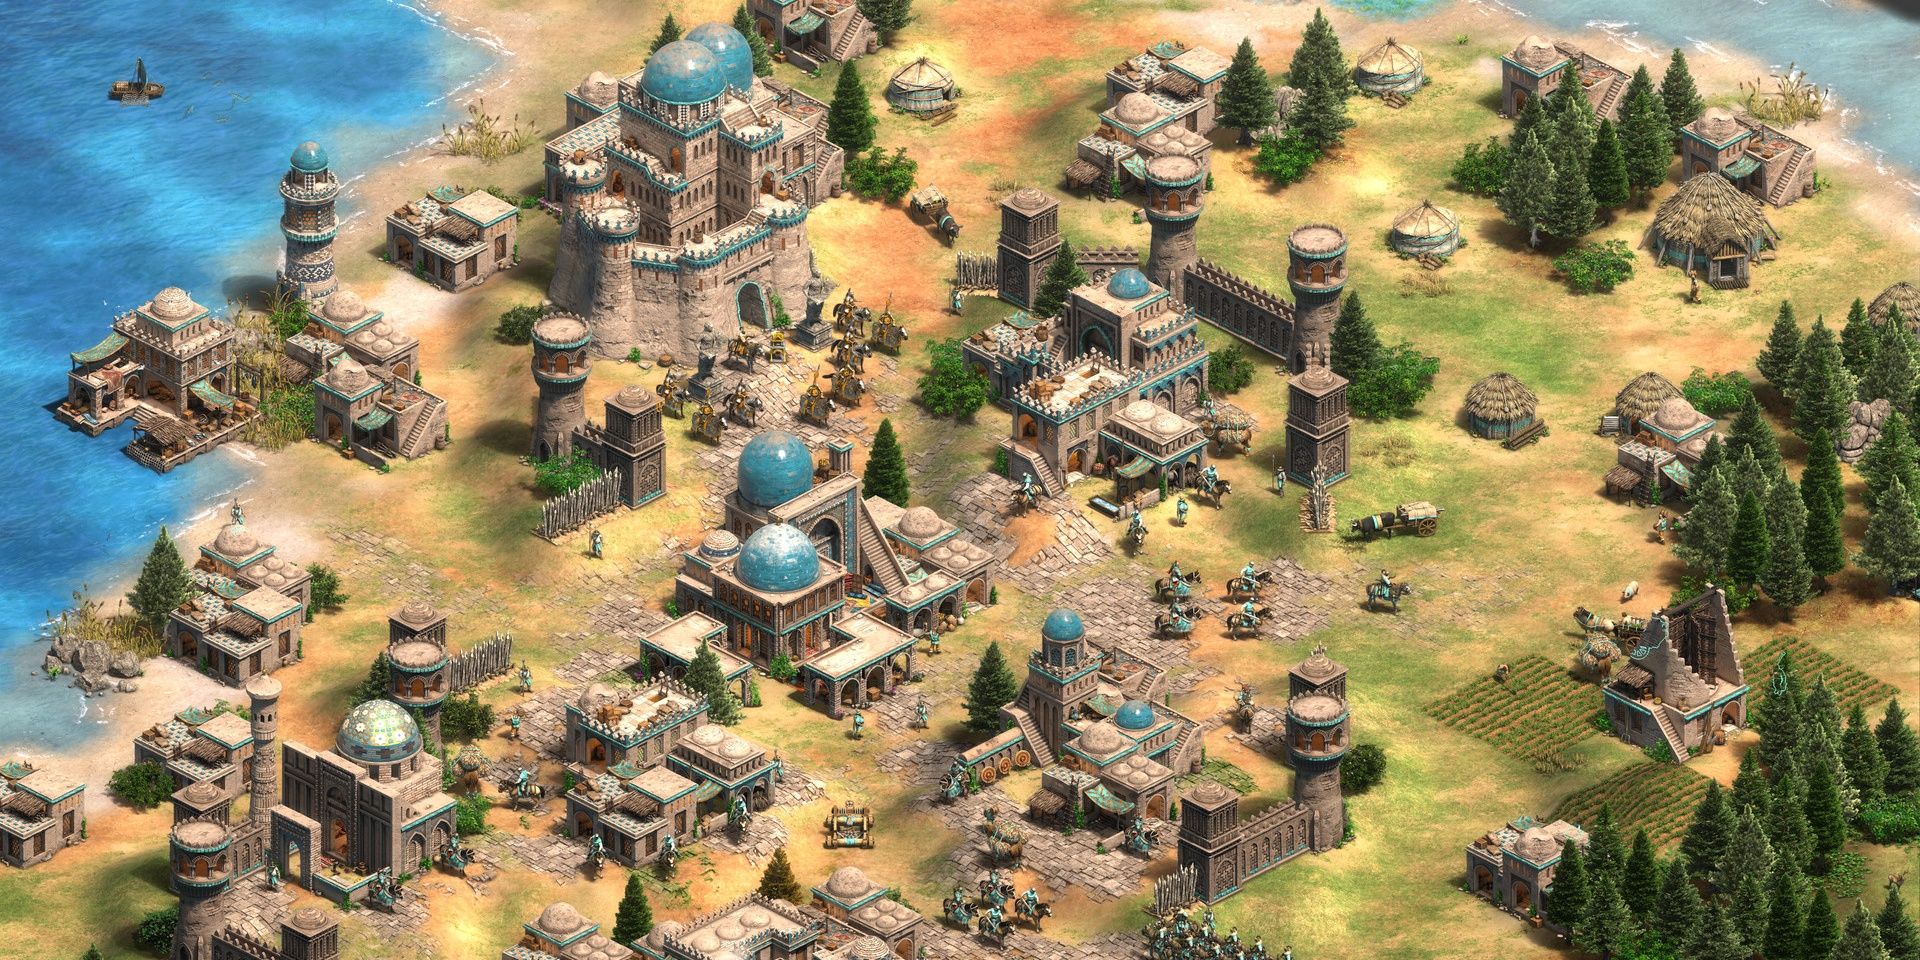 An example of a civilization that can be built in Age of Empires II